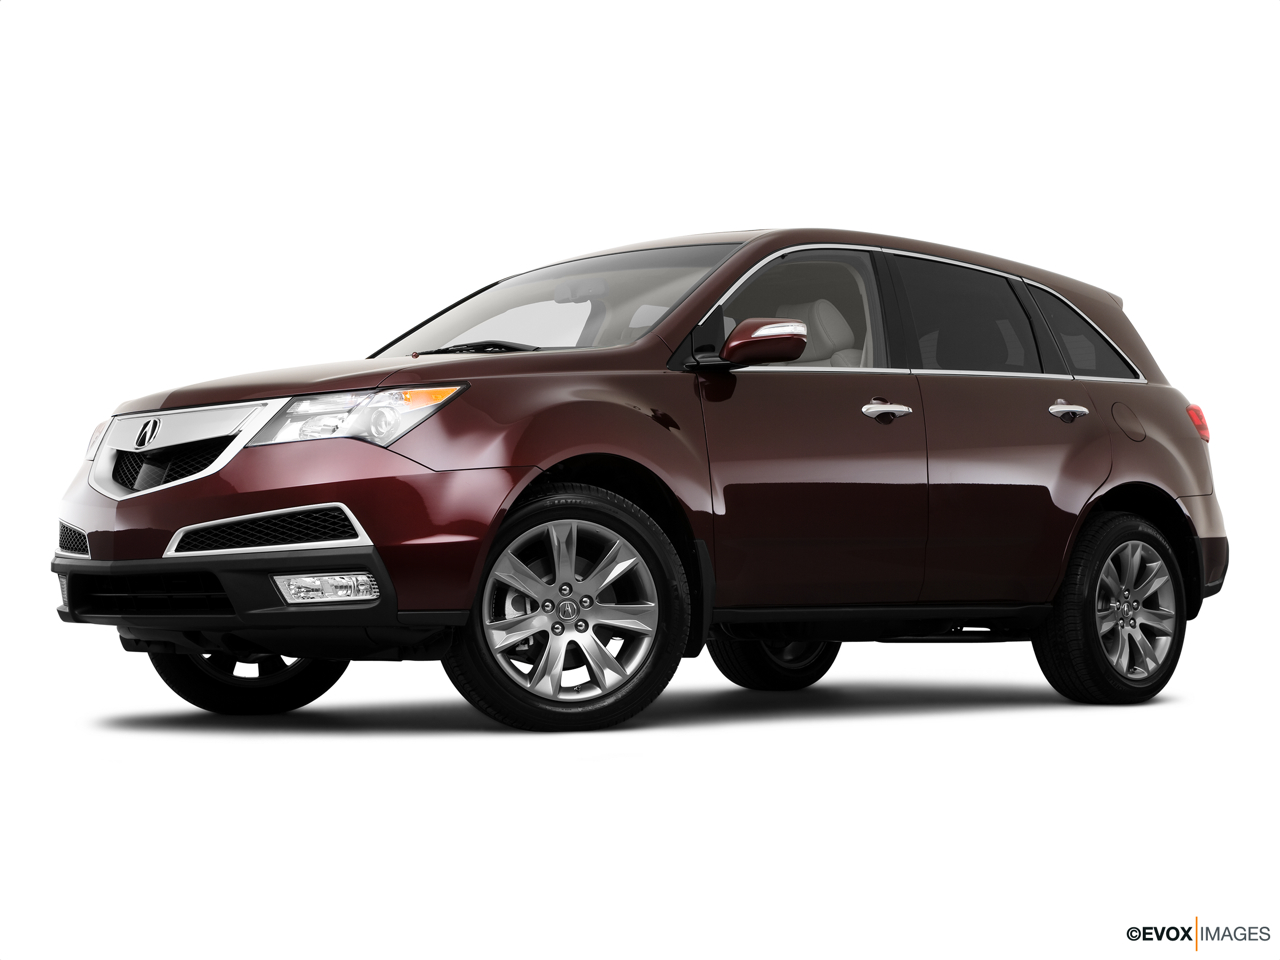 2010 Acura MDX MDX Low/wide front 5/8. 